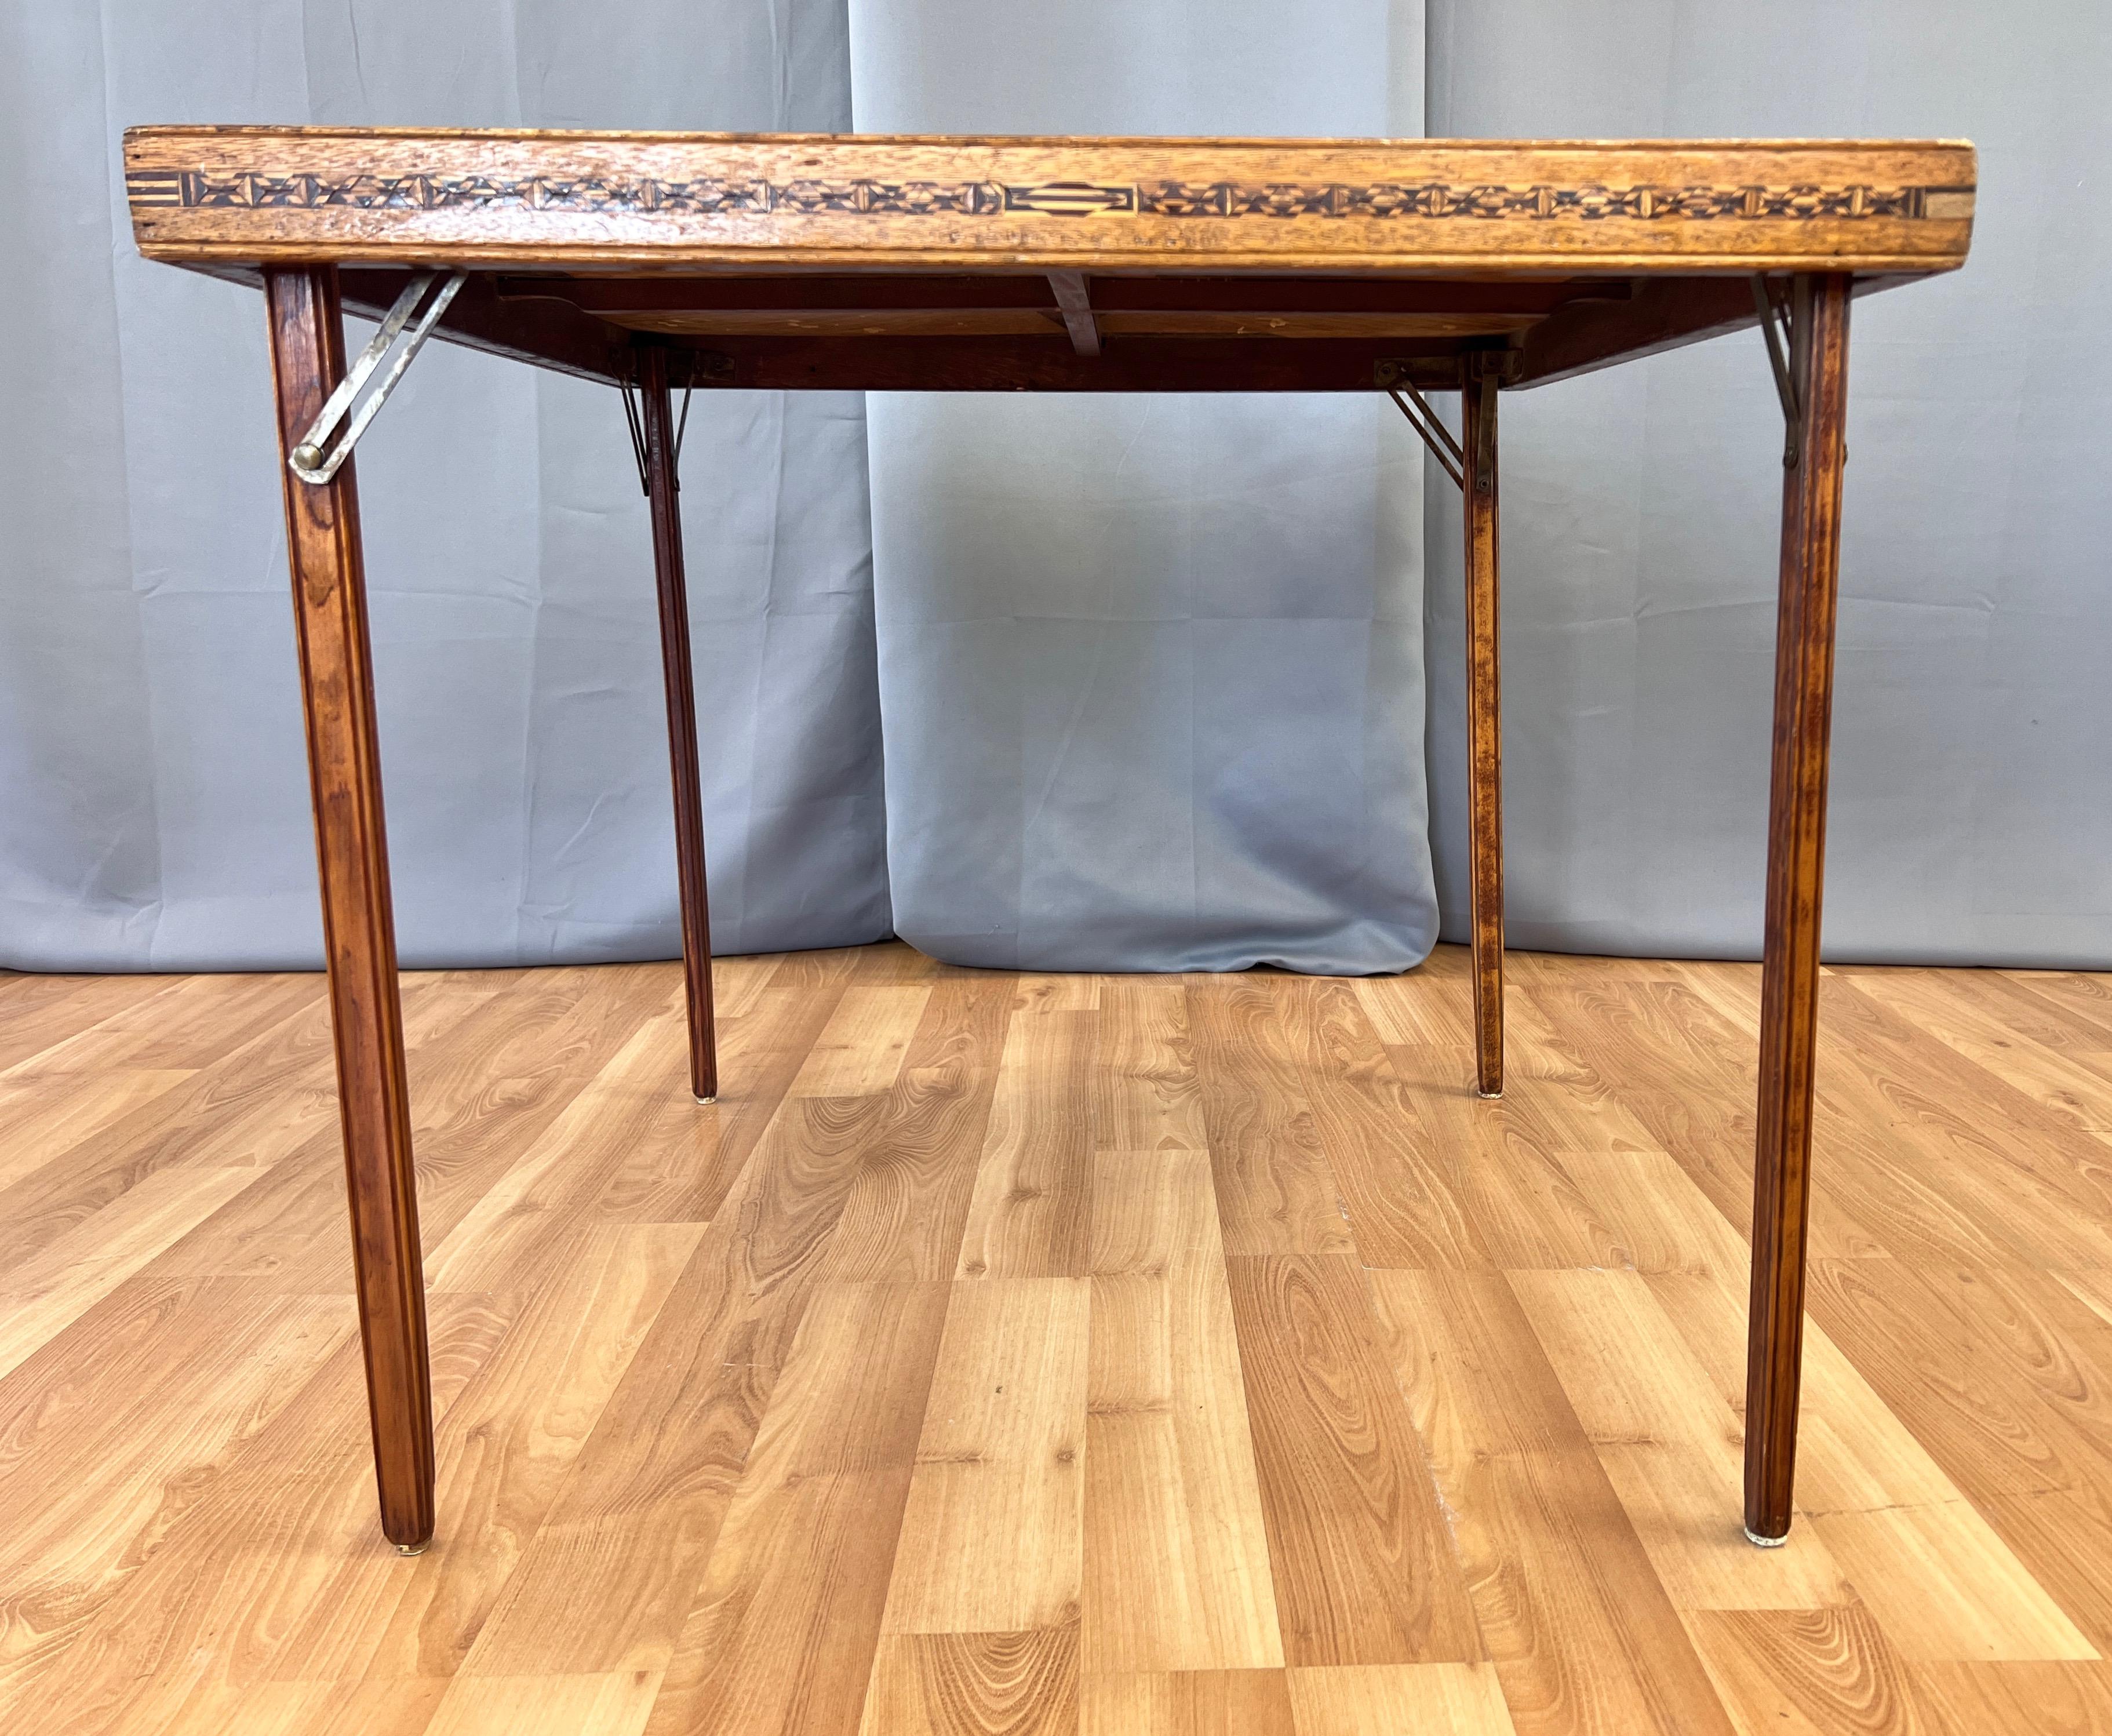 Syrian-Style Exceptionally Intricate Wood Marquetry Folding Card Table, 1930s For Sale 10